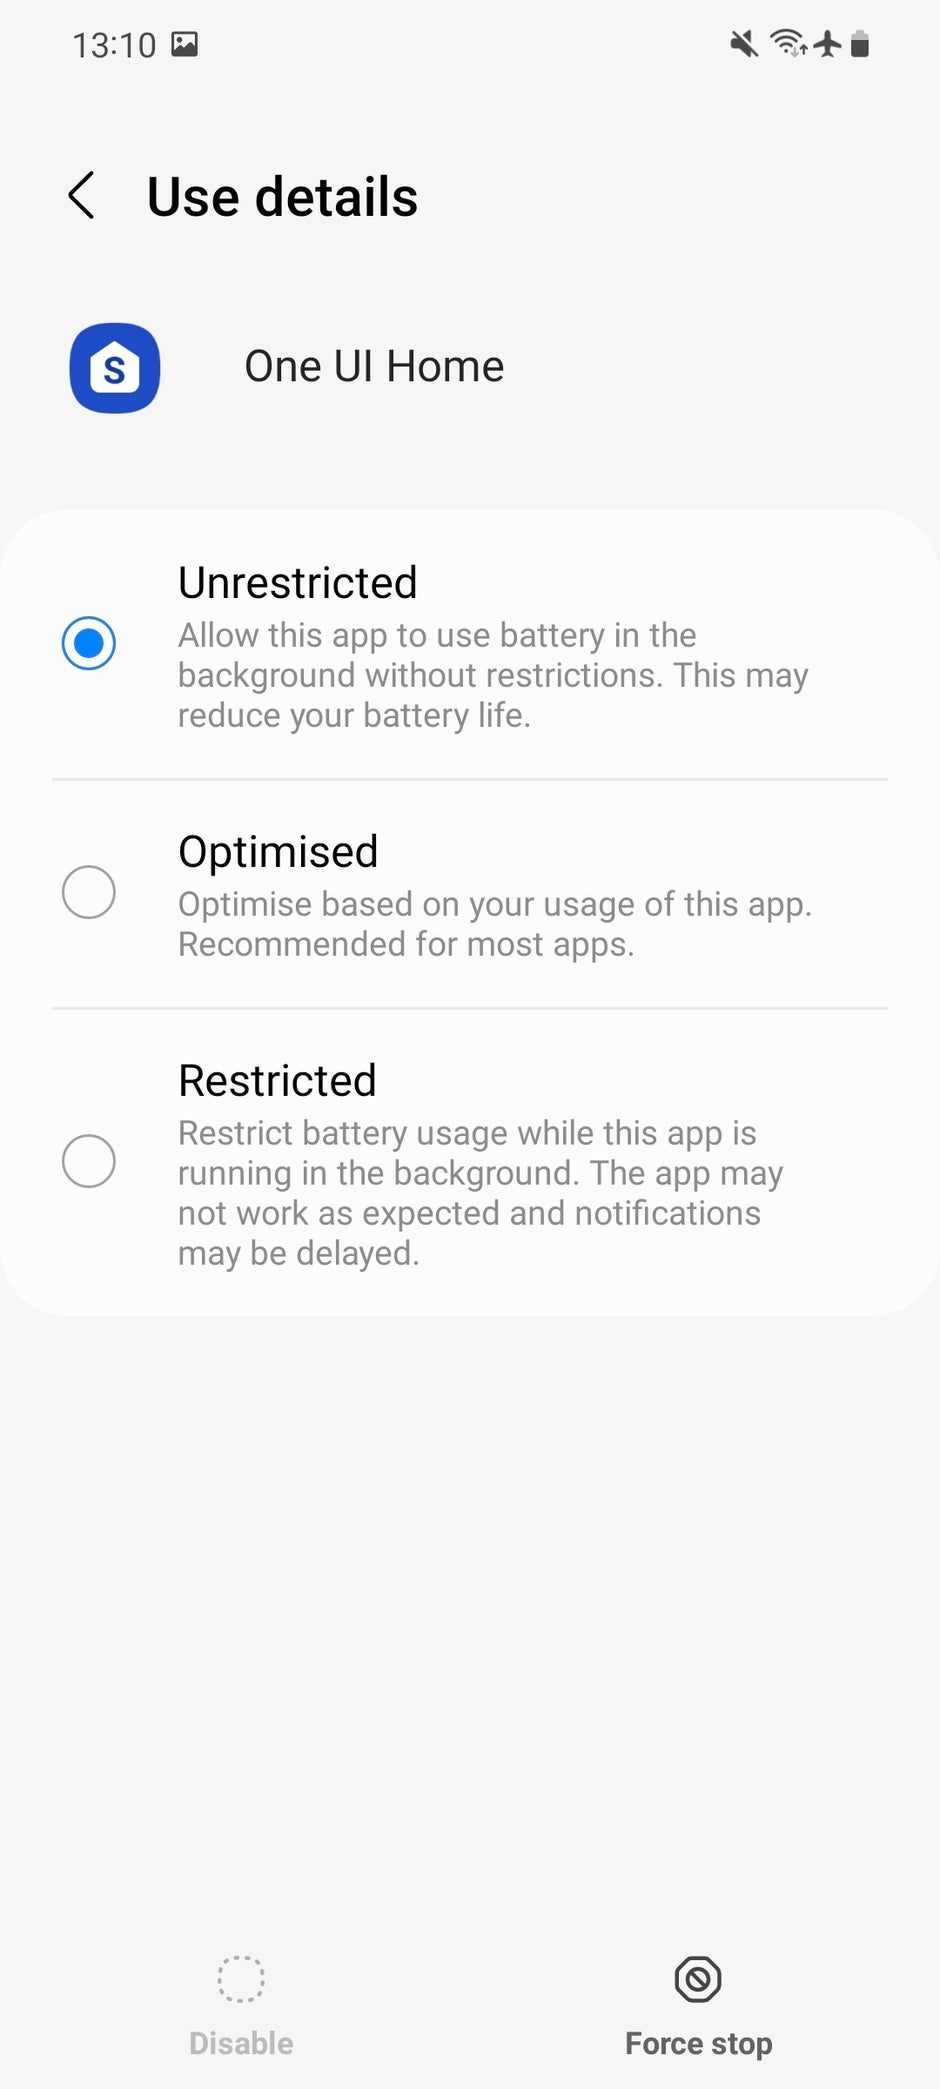 Reddit users suggest giving unrestricted access to One UI Home, but unfortunately that does not solve the problem - Stutter-gate: the number one thing I want to see Samsung fix in the Galaxy S22